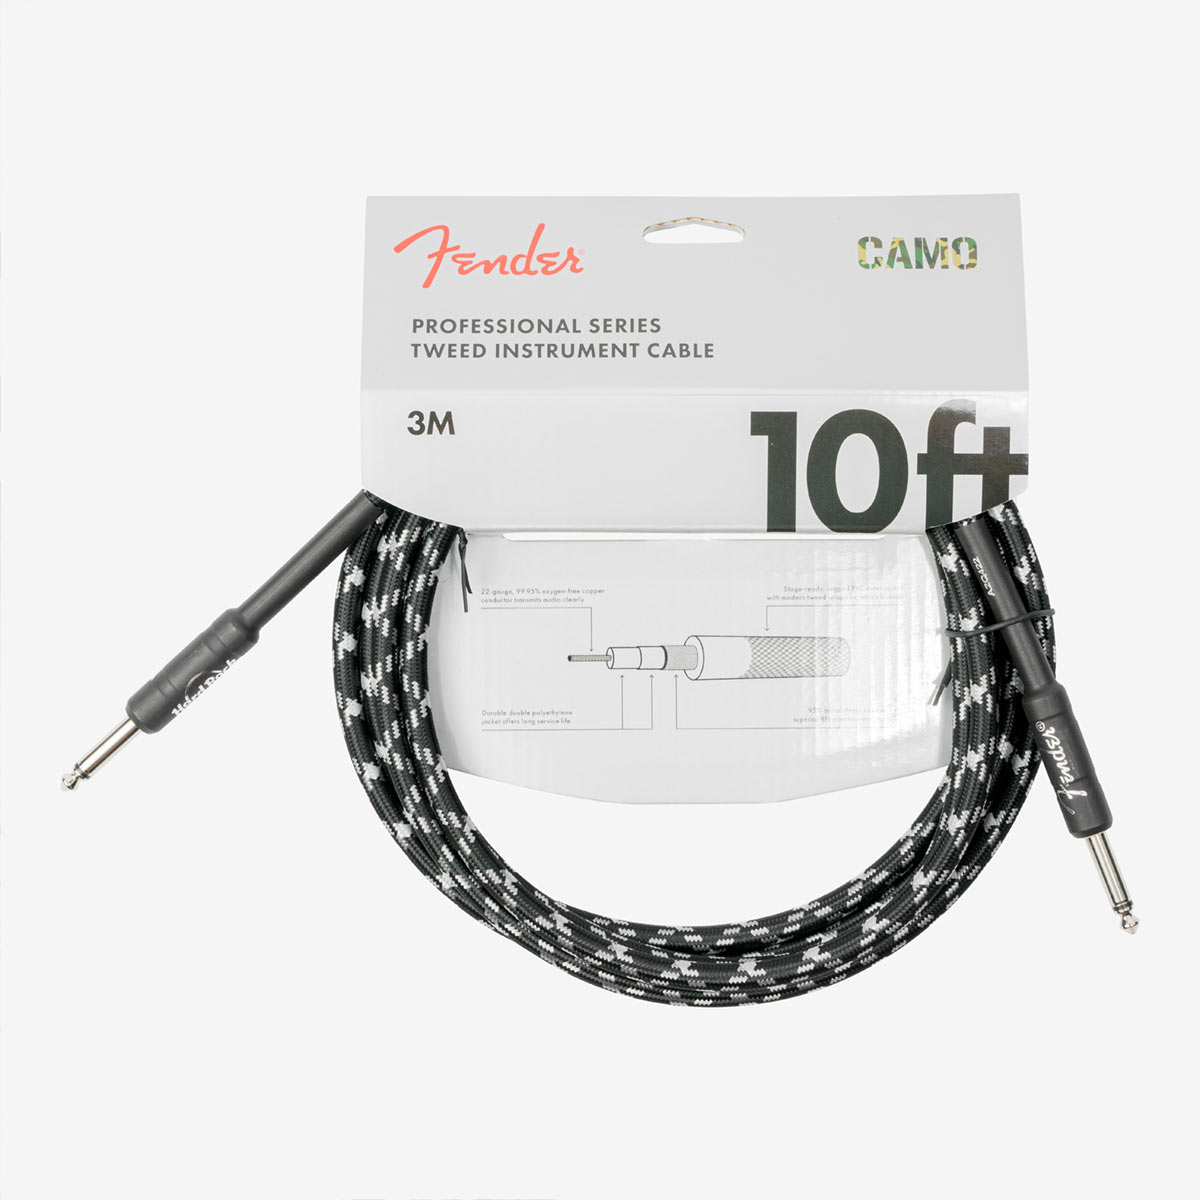 Fender x Hard Rock Instrument Cable 10 Foot in Black Tweed and Camo image number 1